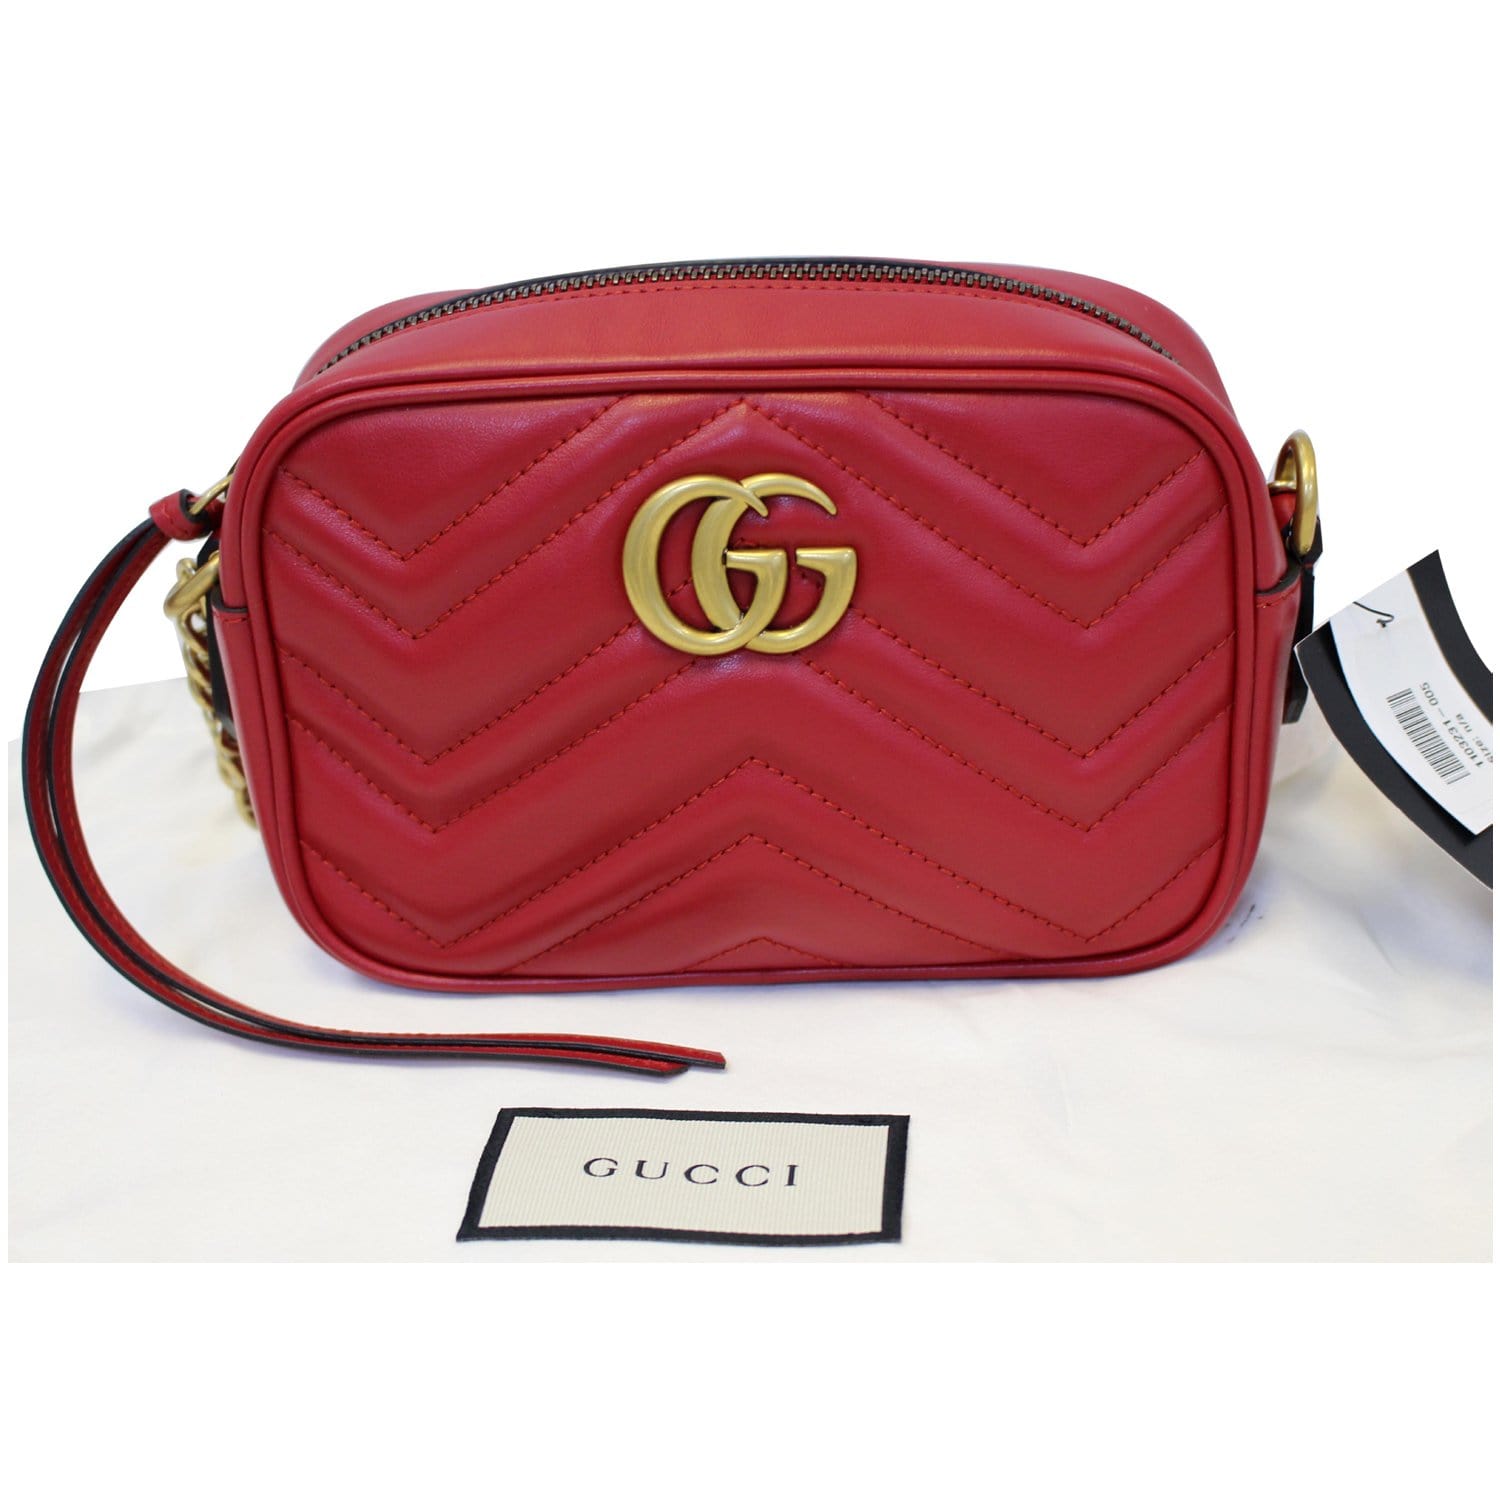 GG Marmont Small shoulder bag in red - Gucci | Mytheresa